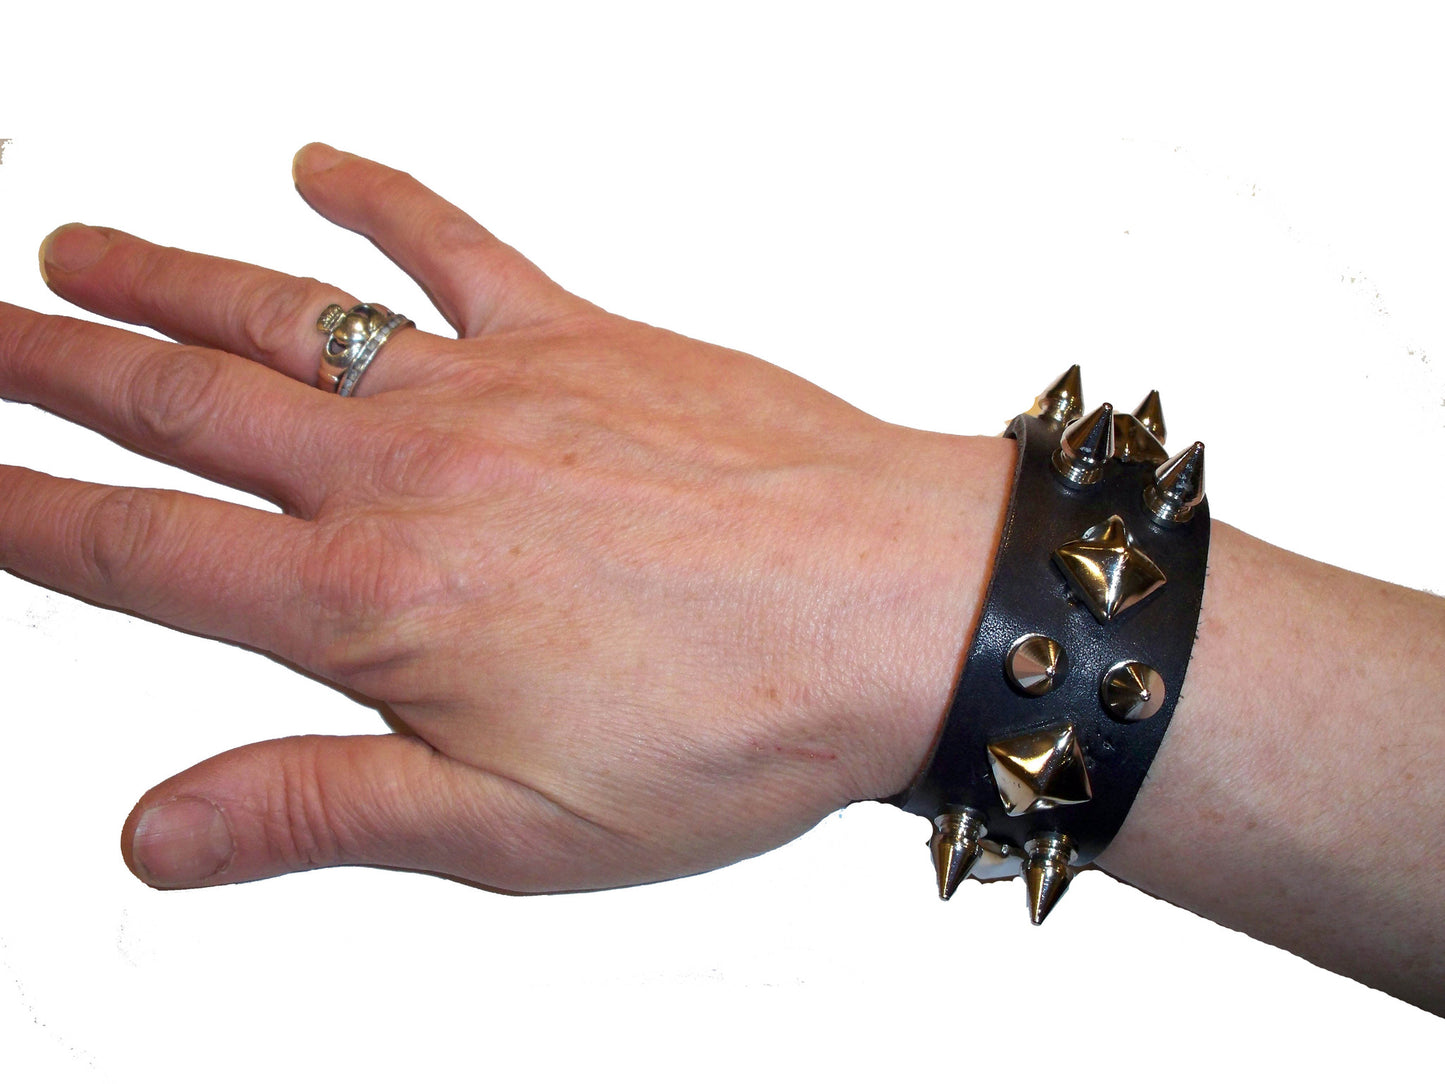 Equillibrium Up-cycled Leather Spiked Cuff Bracelet - Equillibrium - 4